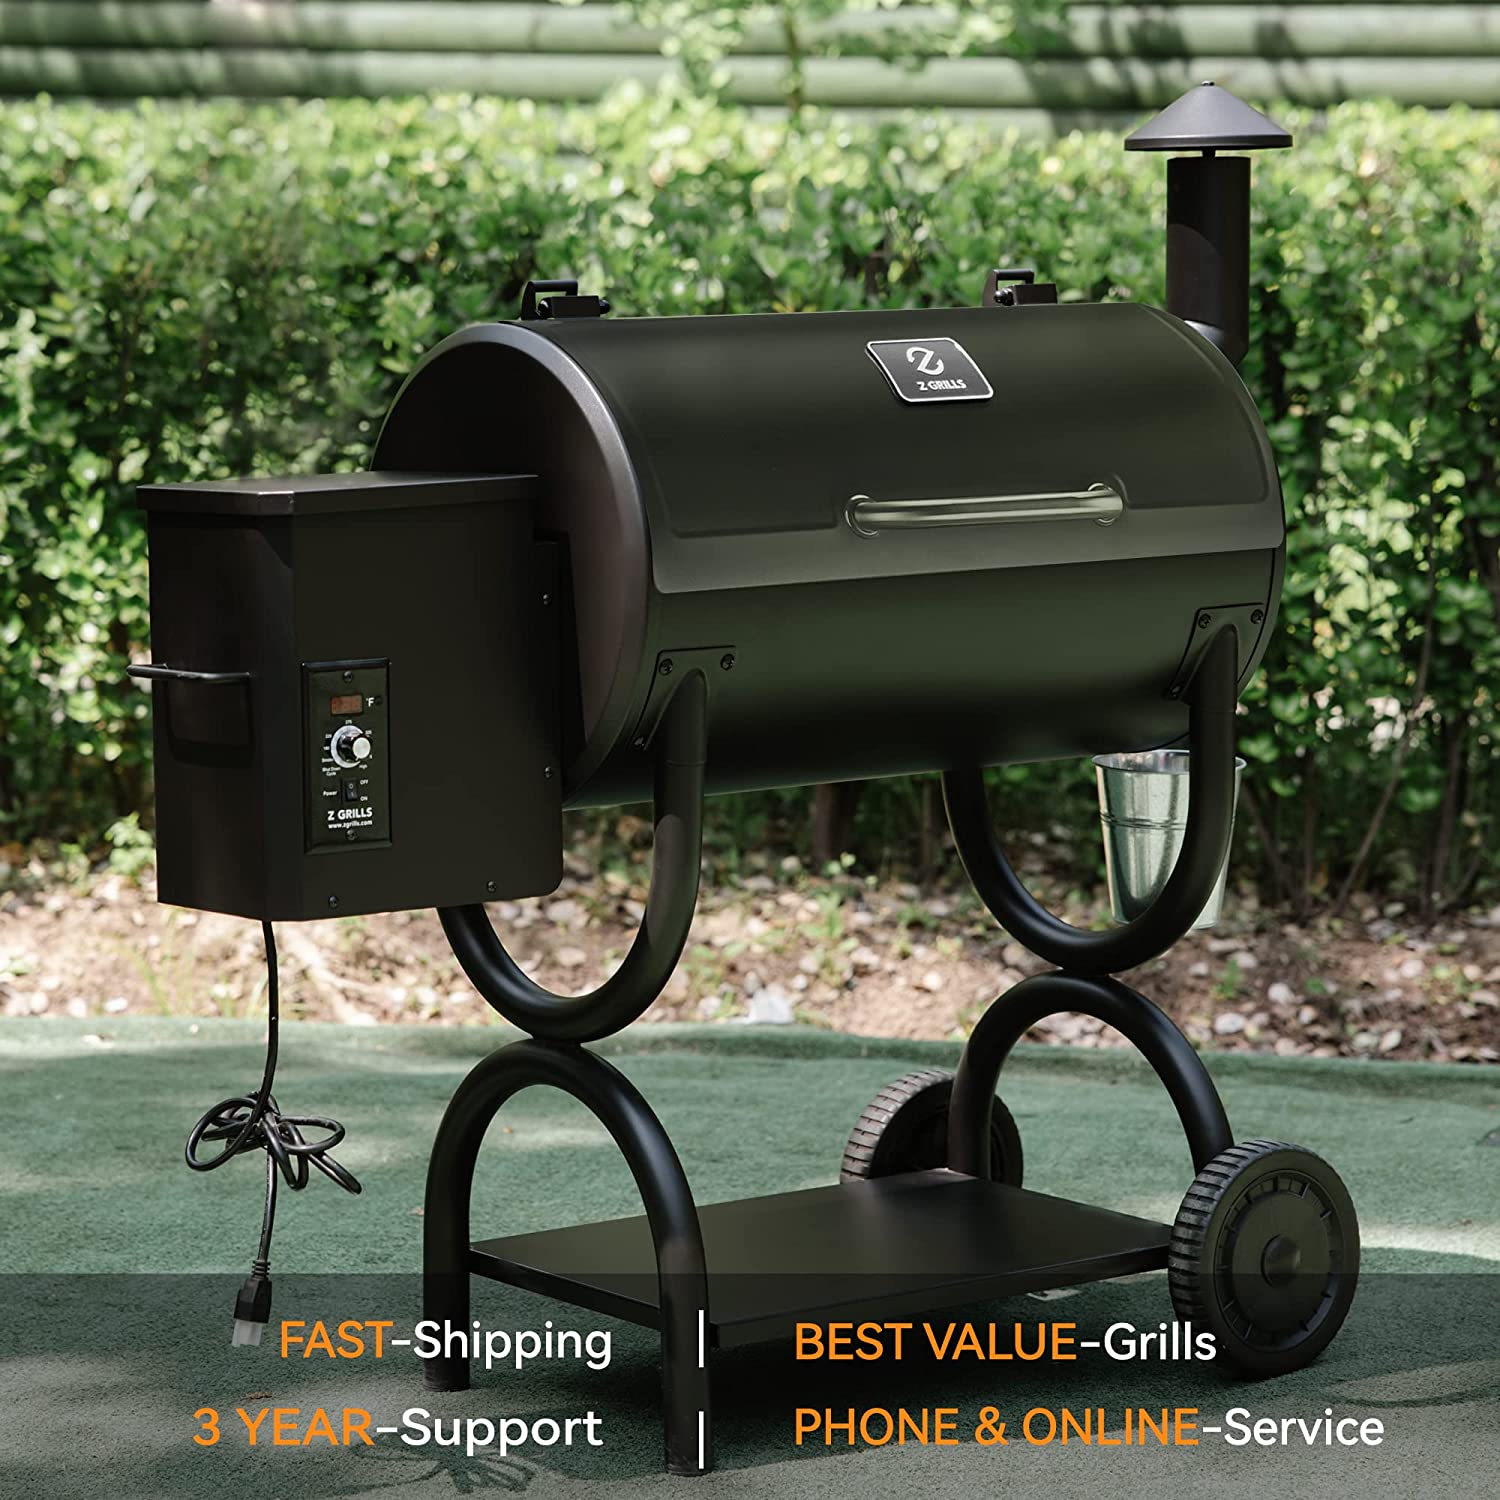 https://bigbigmart.com/wp-content/uploads/2023/06/Z-GRILLS-ZPG-550B-Wood-Pellet-Smoker-Grill-Auto-Temperature-Control-553-sq-in-Cooking-Area-8-in-1-Grill-for-Outdoor-BBQ-Black6.jpg